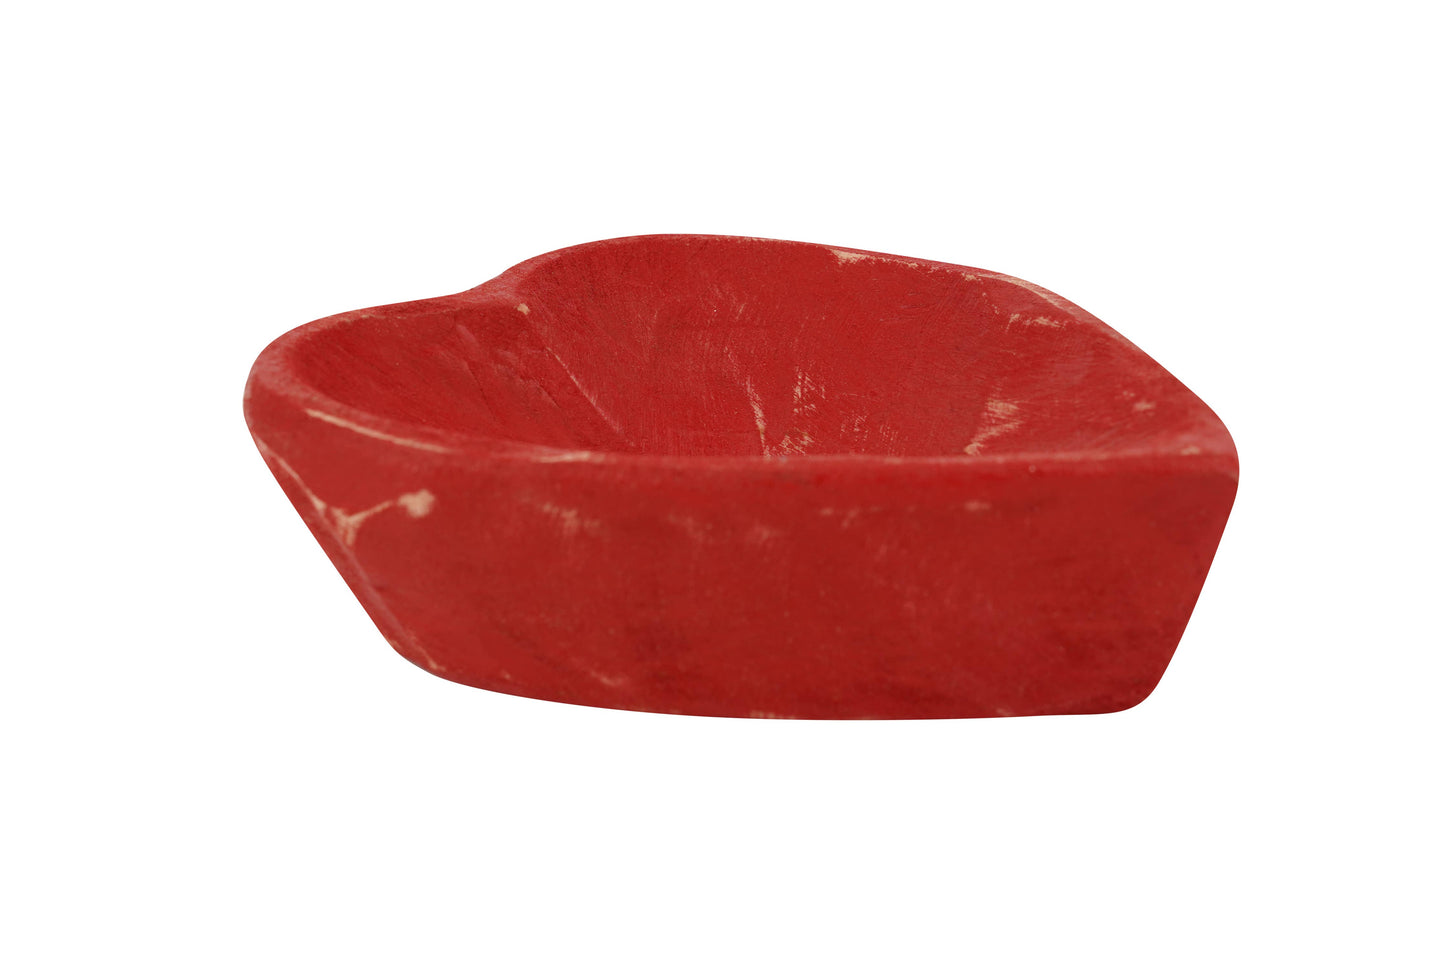 Small red heart bowl